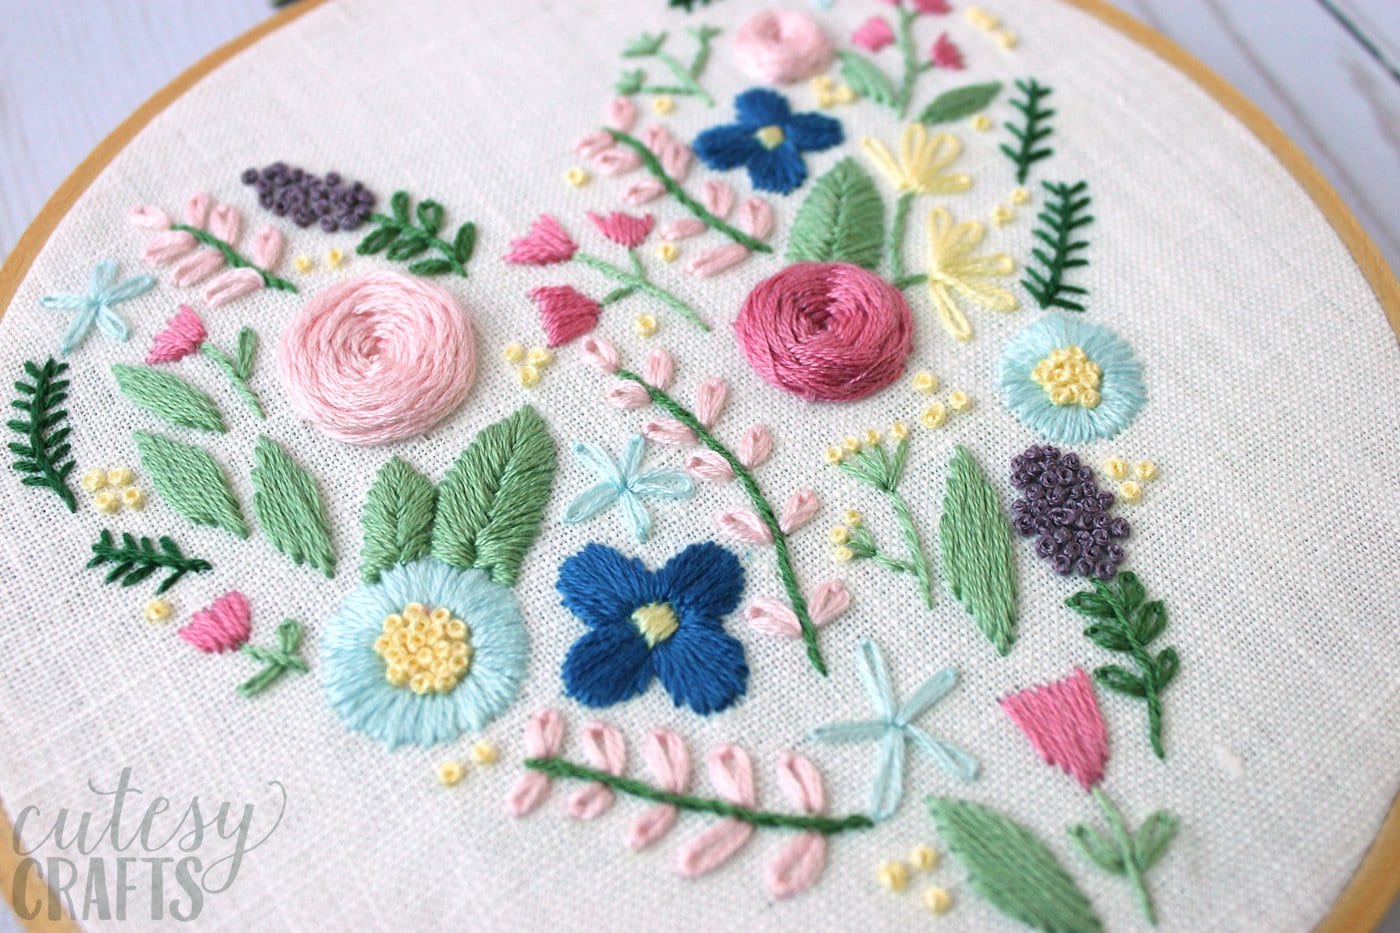 Learn hand embroidery stitches with this beautiful free floral heart embroidery pattern #embroiderypattern #handembroidery #embroideredflowers #embroiderystitches #handembroiderystitches